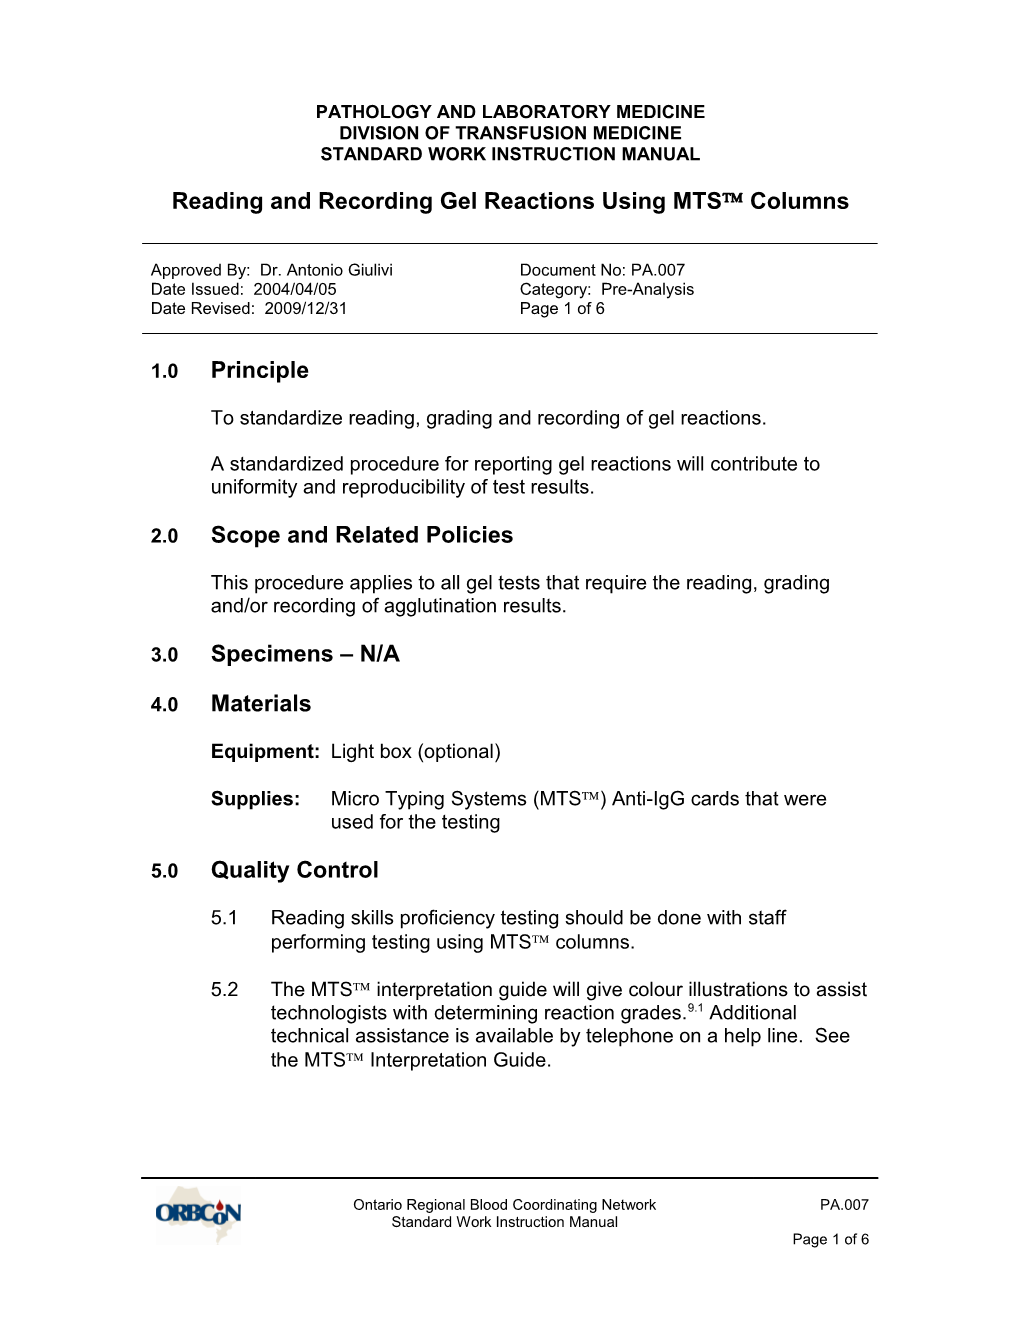 PA.007 Reading and Recording Gel Reactions Using MTS Columns